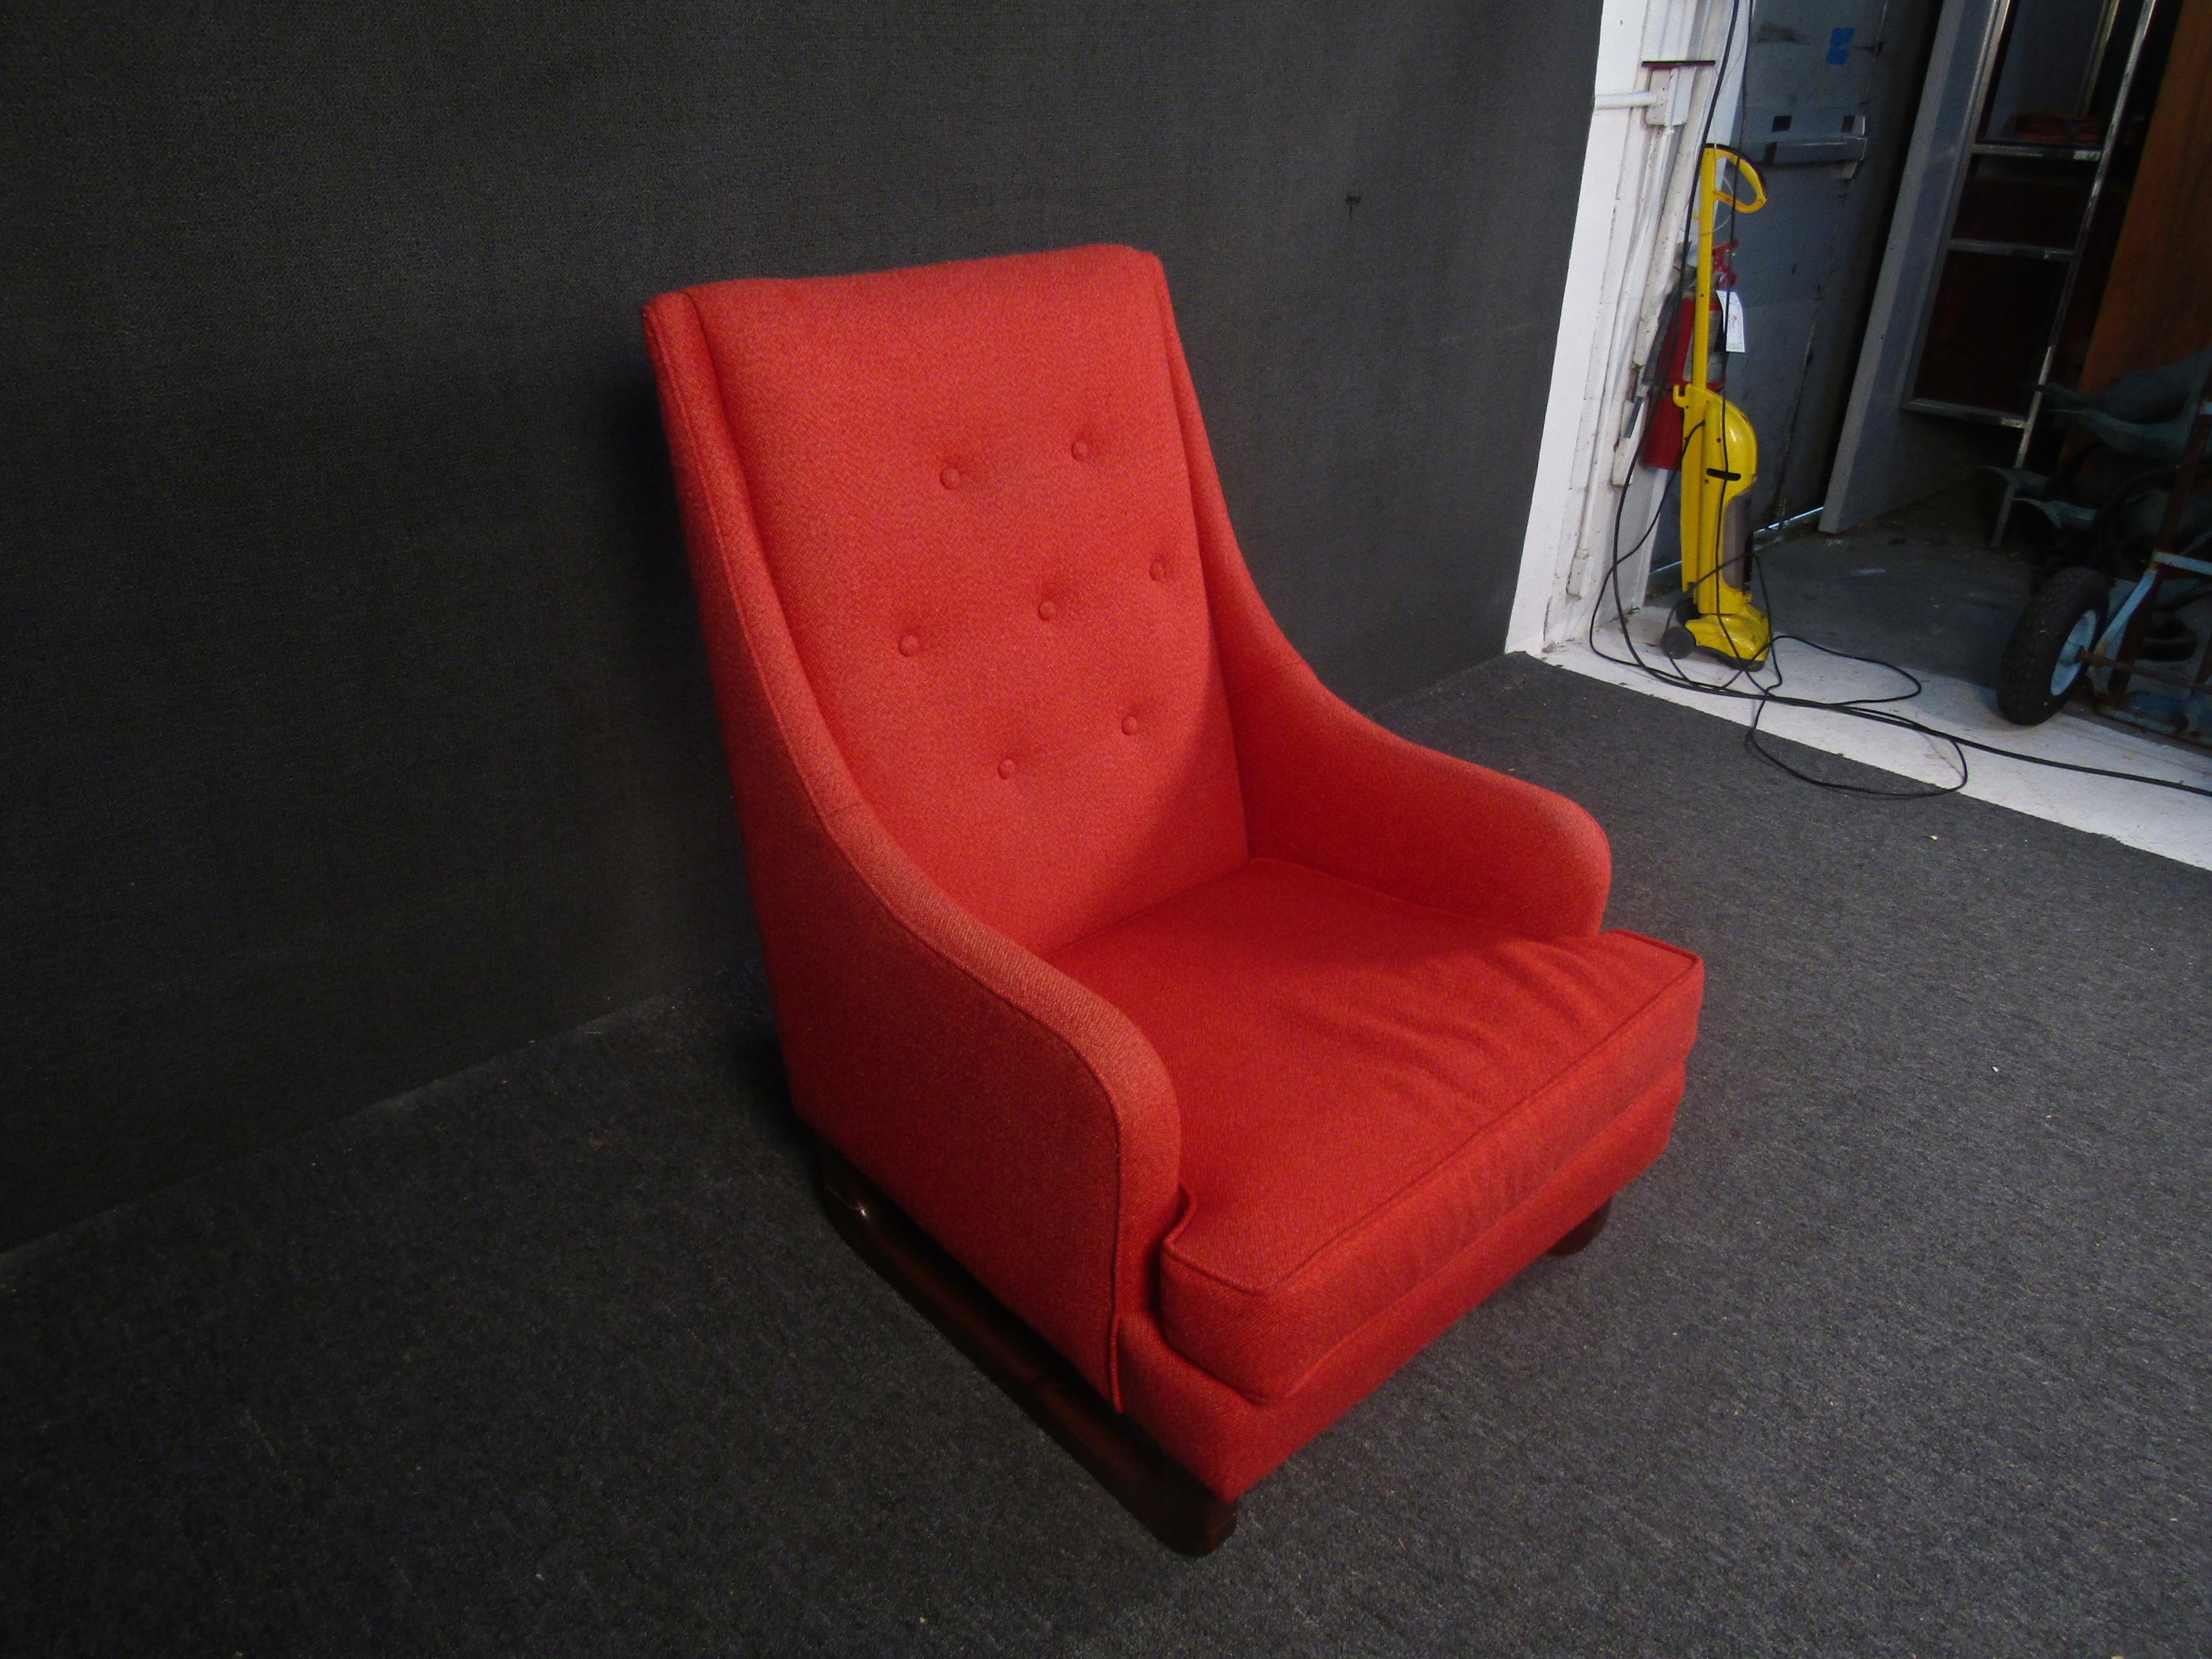 Beautiful and comfortable vintage armchair styled after the designs of Adrian Pearsall. Vivid red upholstery is paired with rich wooden legs to stunning effect, while a comfortable cushioned design makes this perfect for any reading room or living